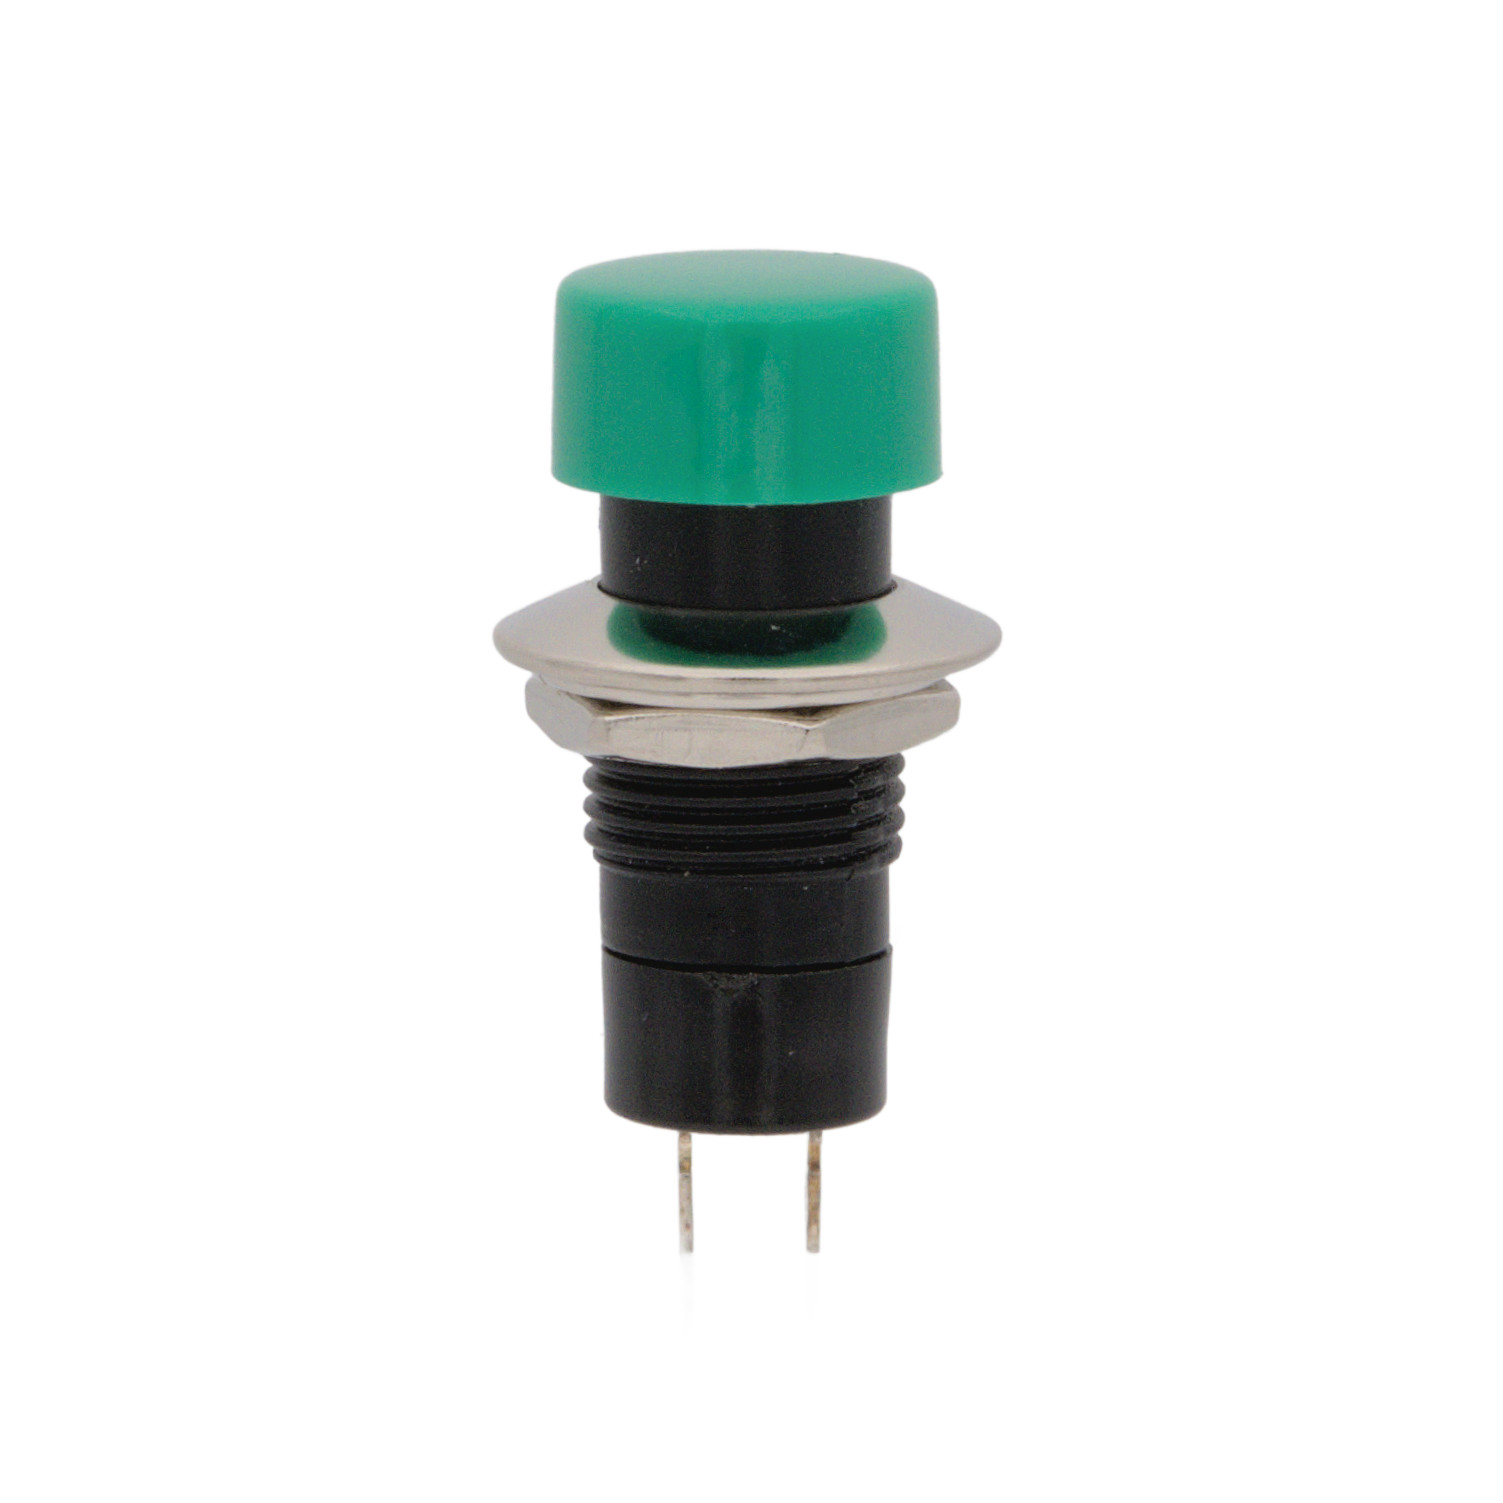 PUSHBUTTON SWITCH, OPEN TYPE, 125V. 3A, GREEN COLOUR